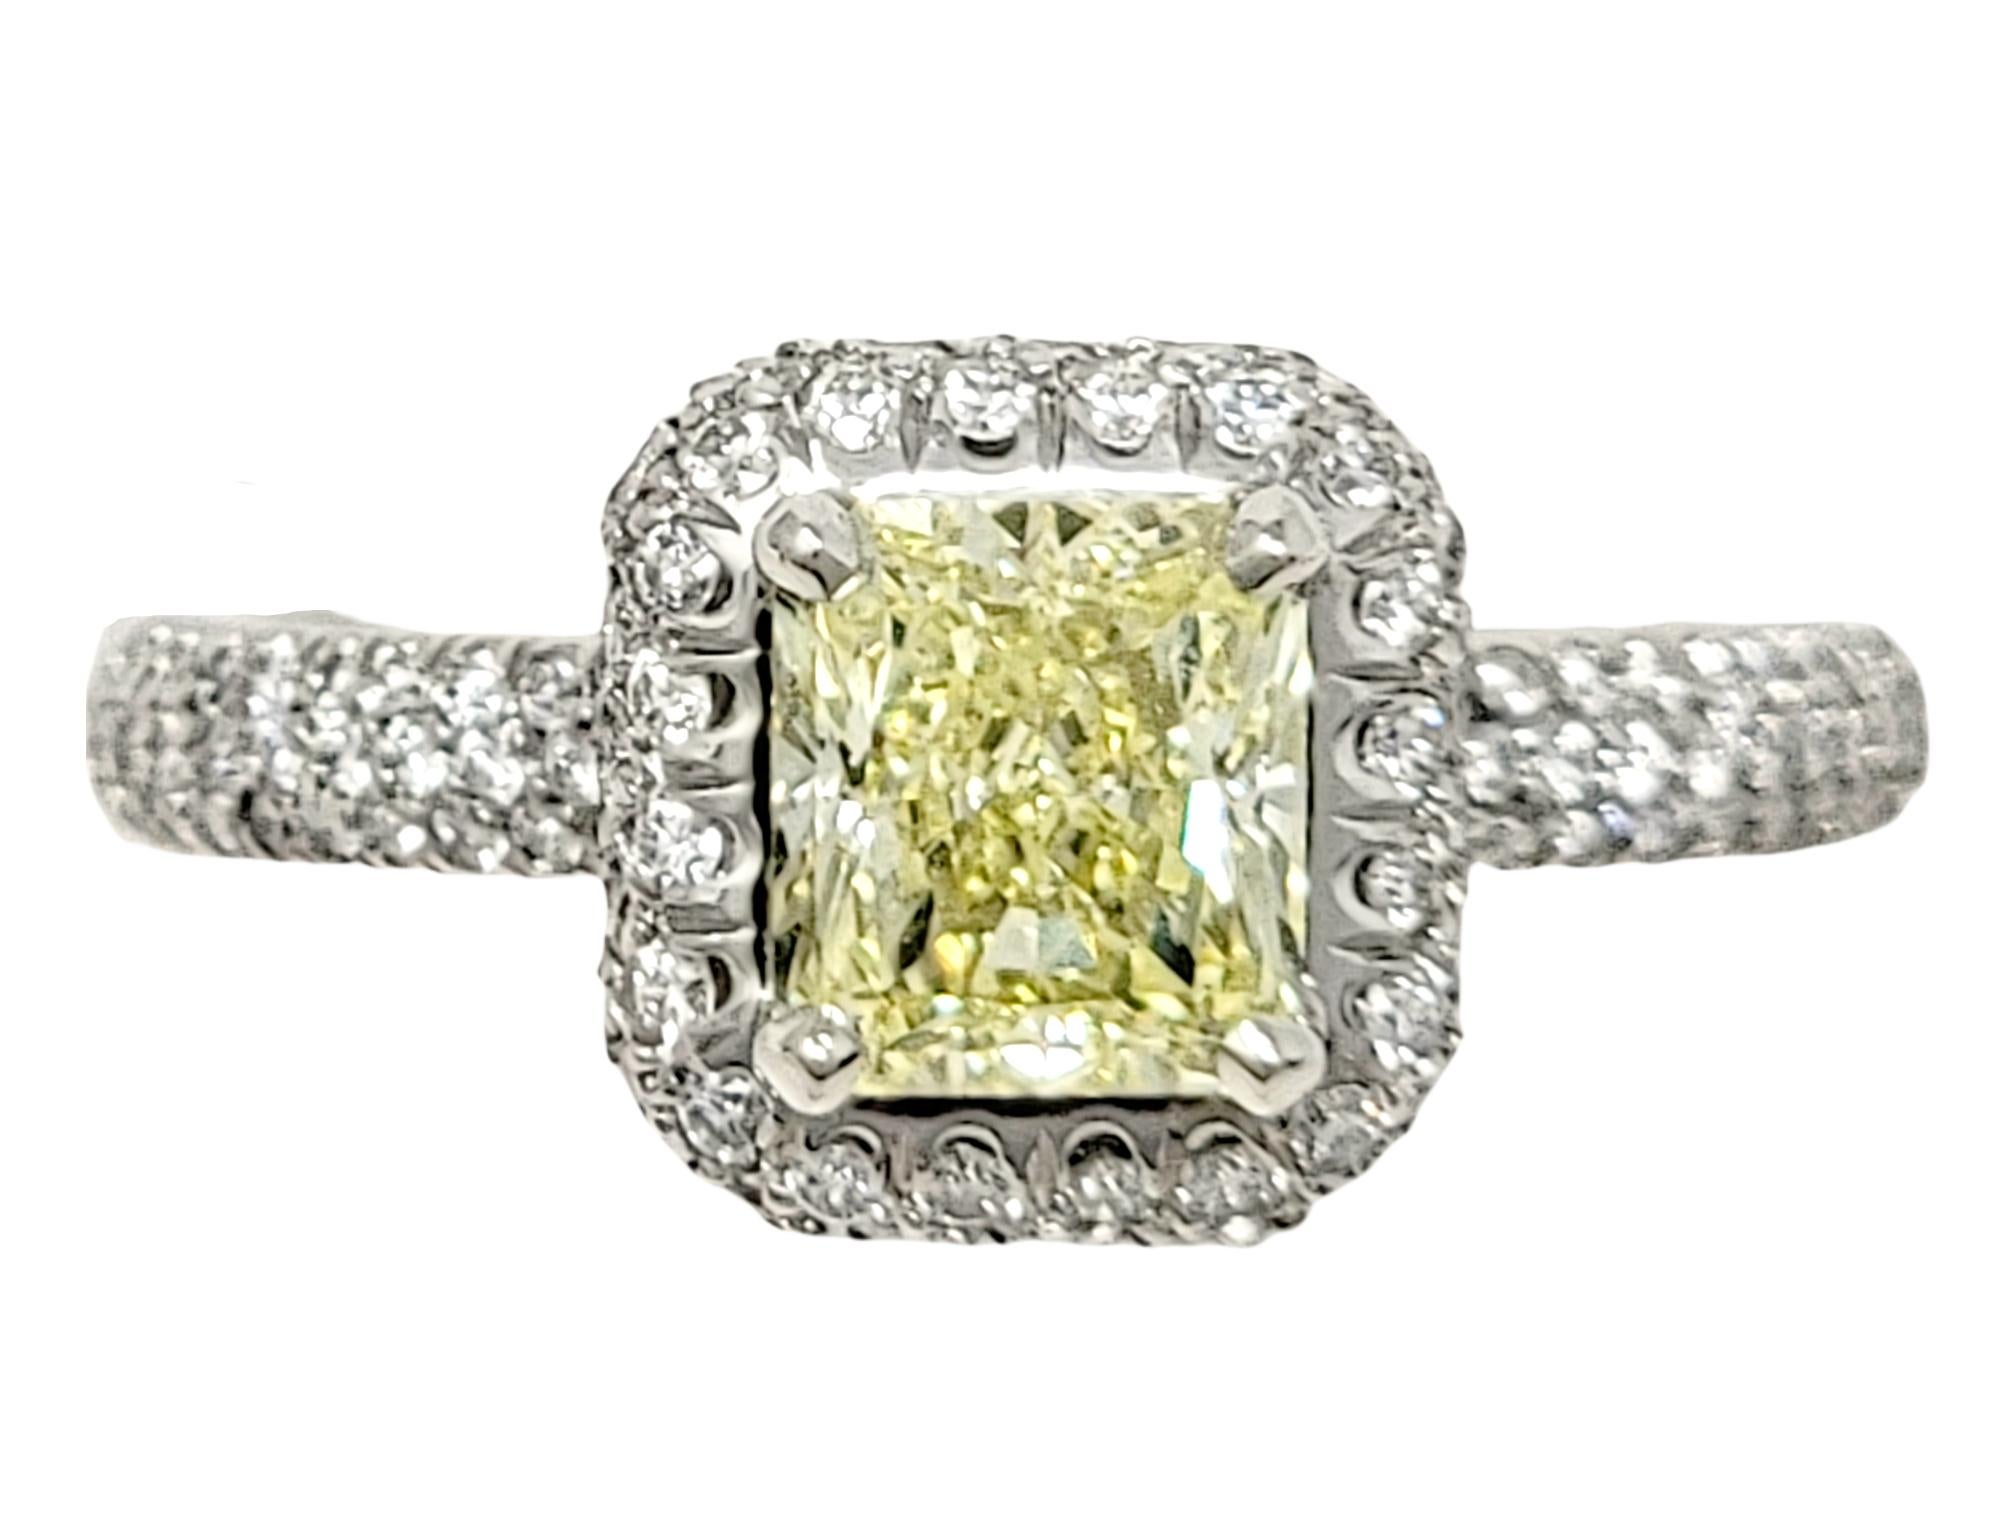 Ring size: 6

This absolutely exquisite engagement ring combines white and yellow diamonds in a modernized classic design that showcases the color and brilliance of both. The breathtaking ring features a sparkling radiant cut 1.41 carat Natural